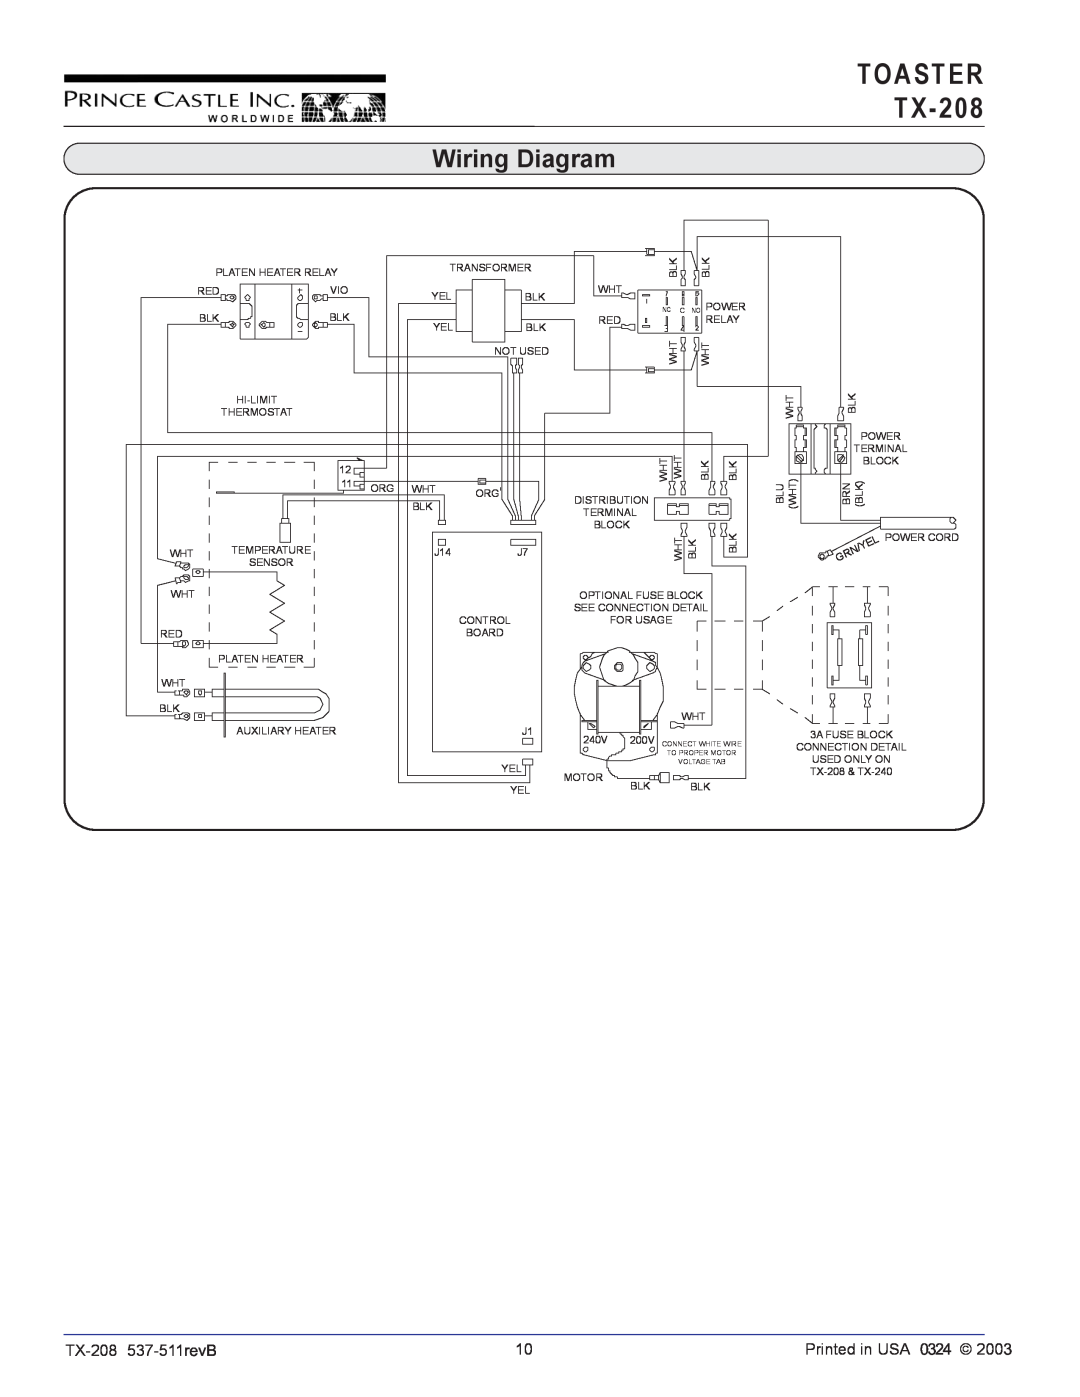 Prince Castle Wiring Diagram, TOASTER TX-208, Nc C, 200V CONNECT WHITE WIRE, To Proper Motor, Voltage Tab 